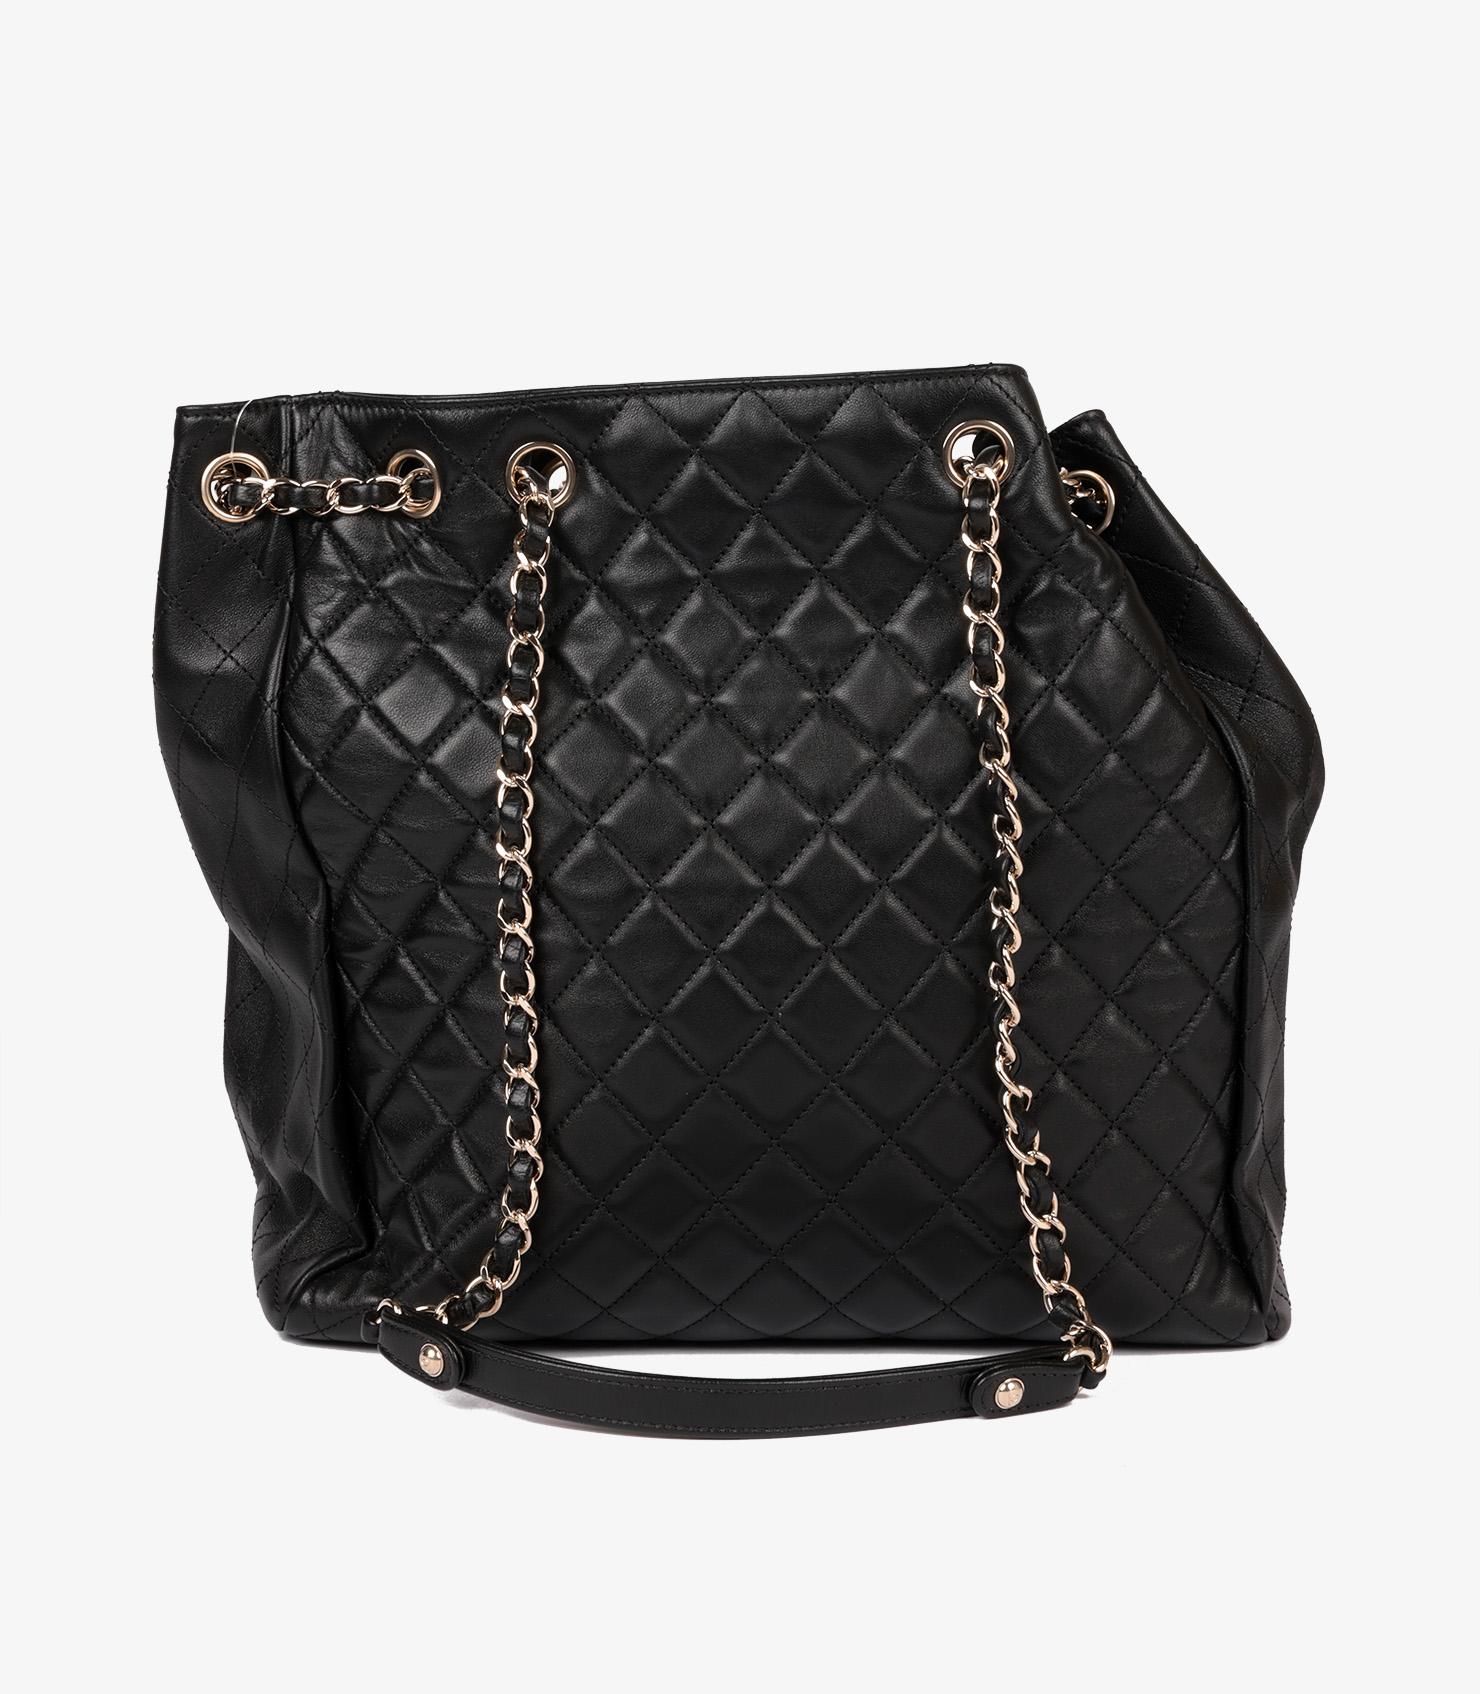 Chanel Black Quilted Lambskin Large Classic Bucket Bag 1